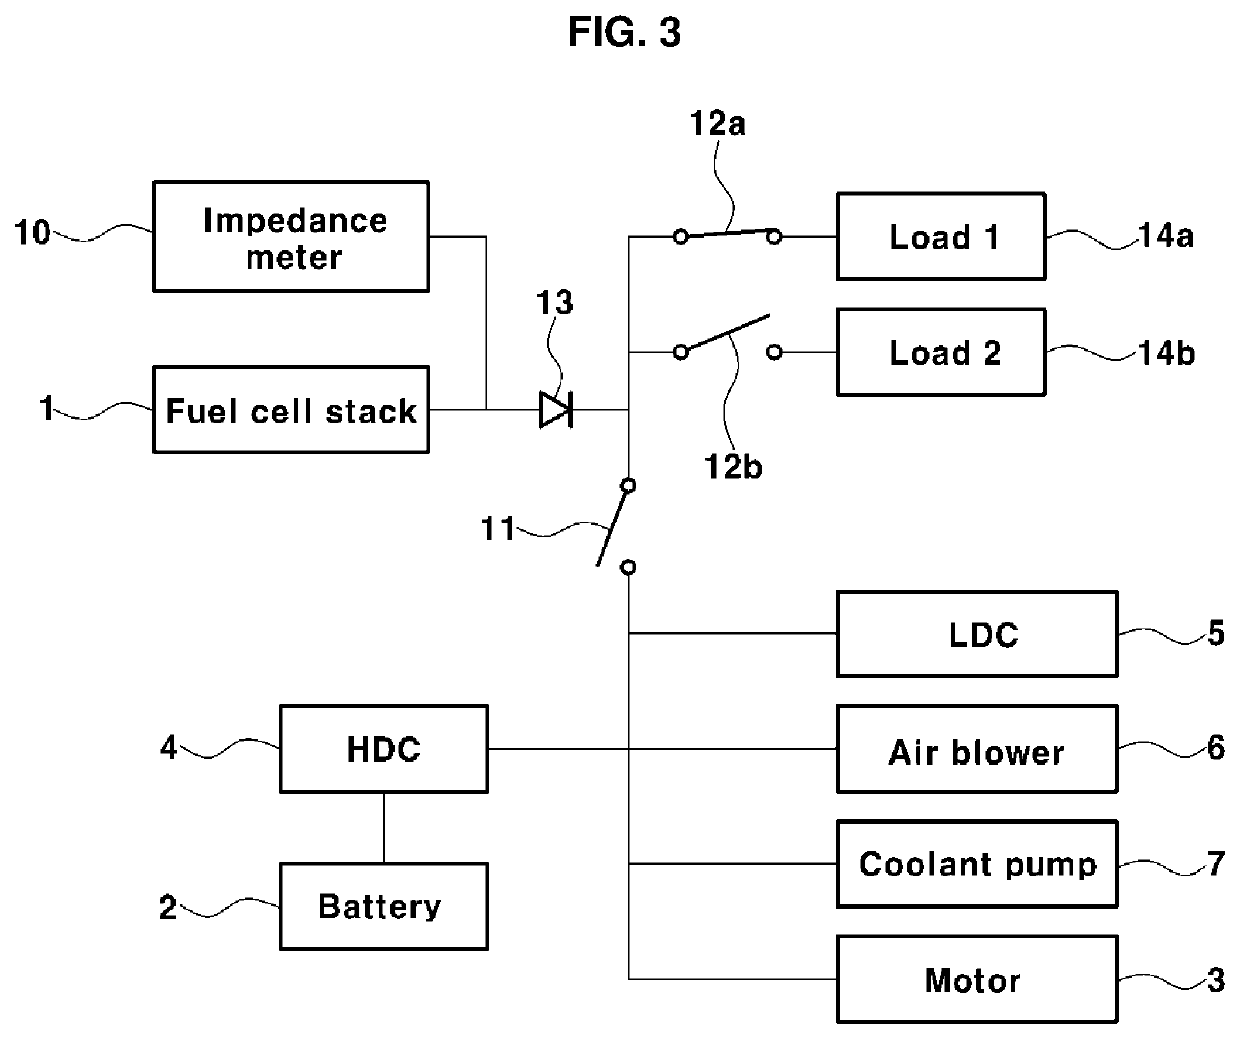 Method of measuring impedance of fuel cell stack in vehicle